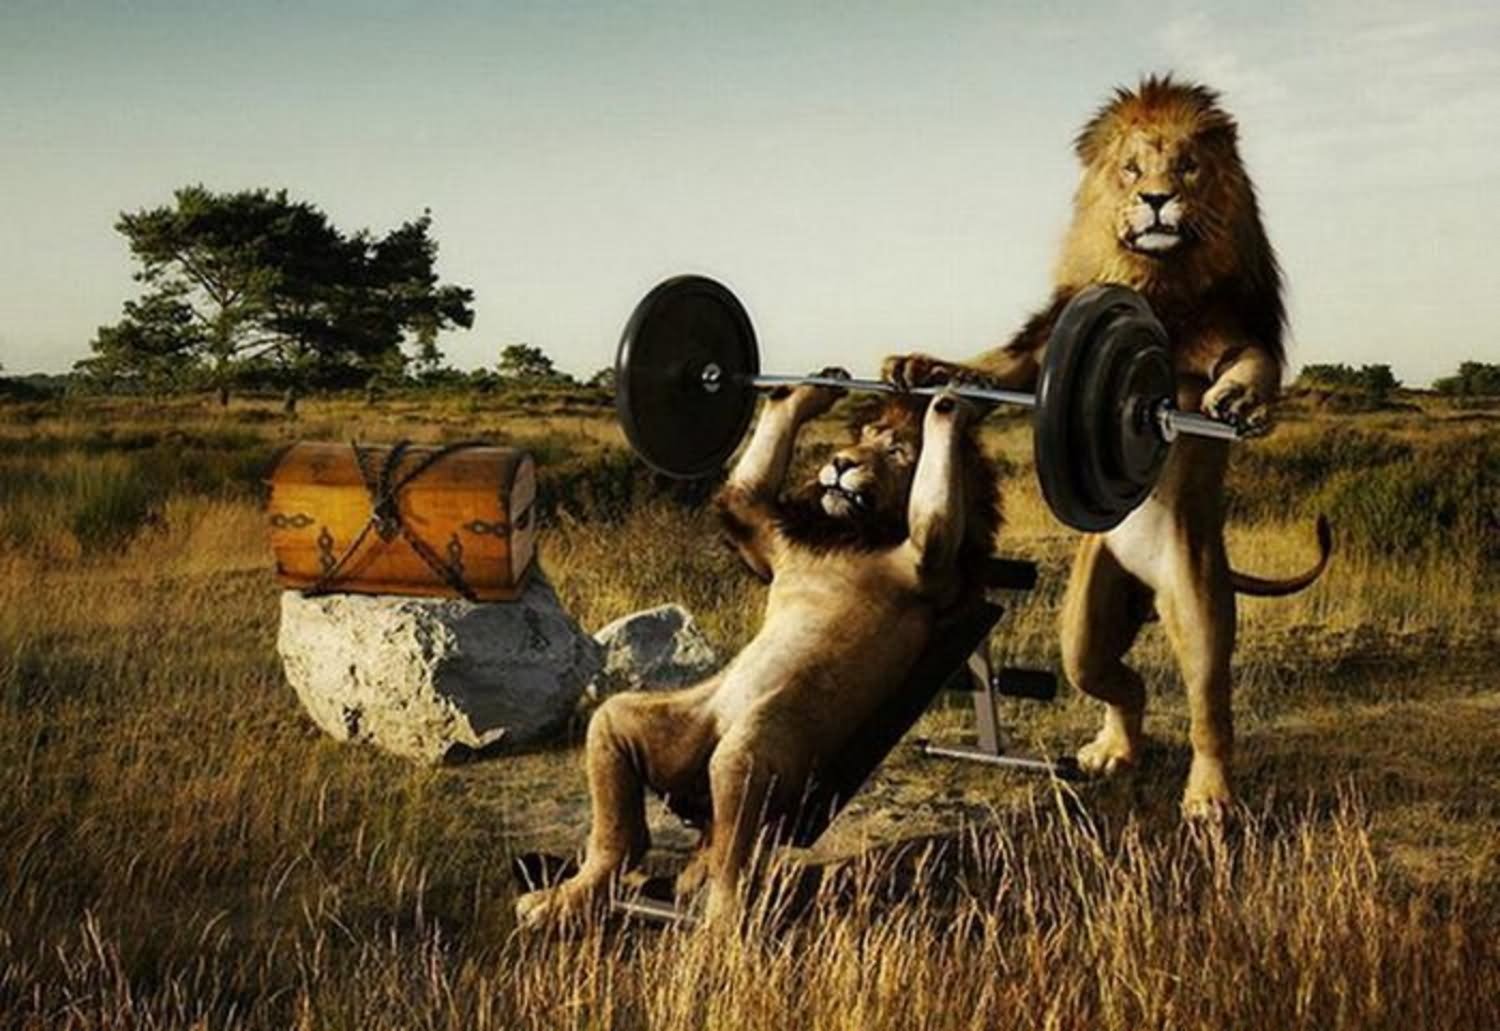 Lions Doing Exercise Funny Image